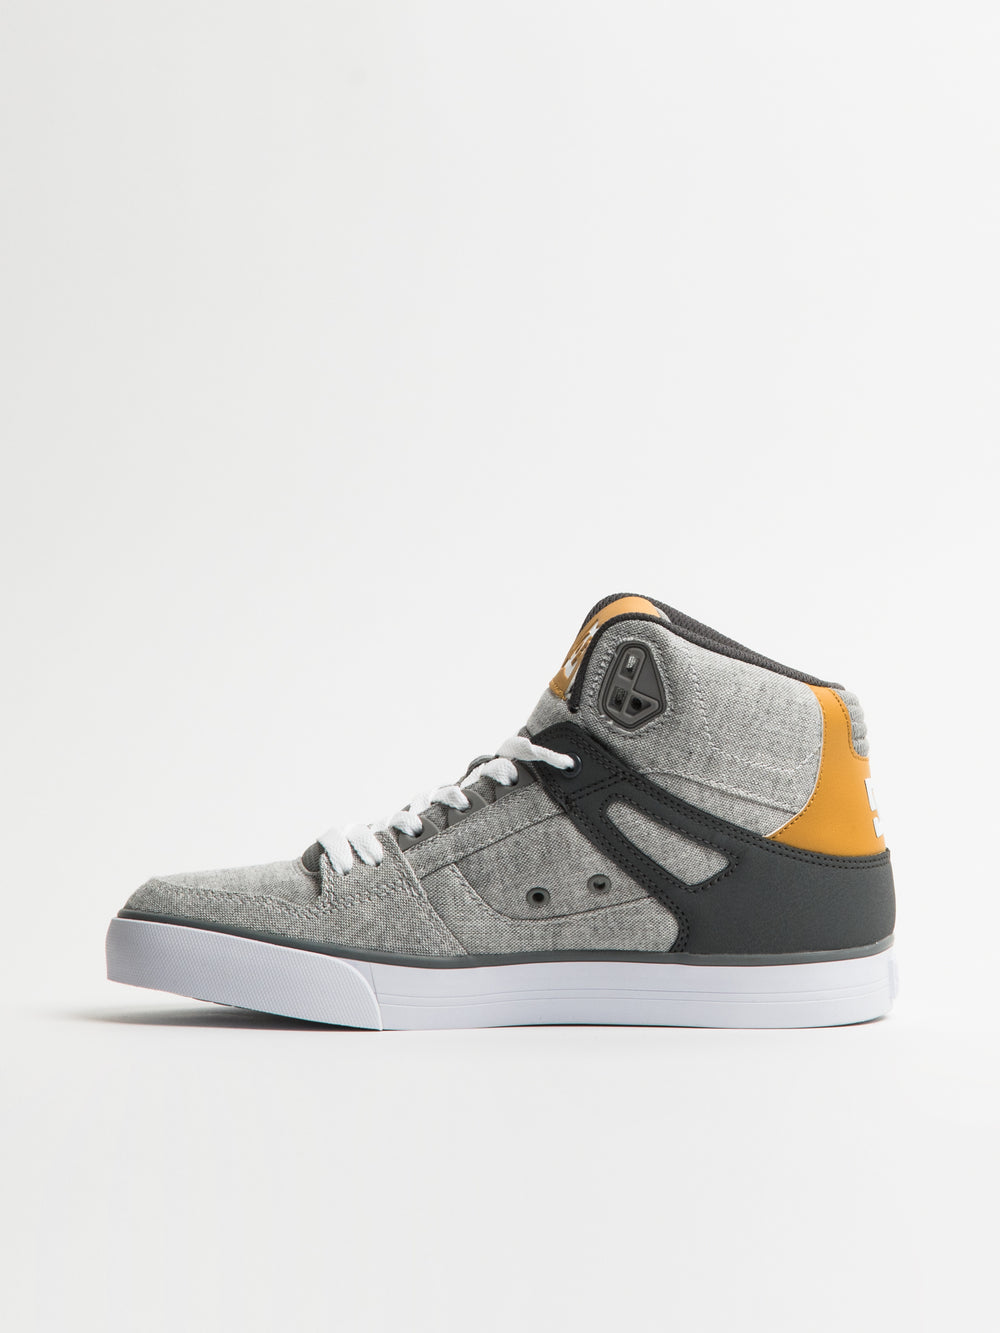 MENS DC SHOES PURE HIGH TOP WC SHOES